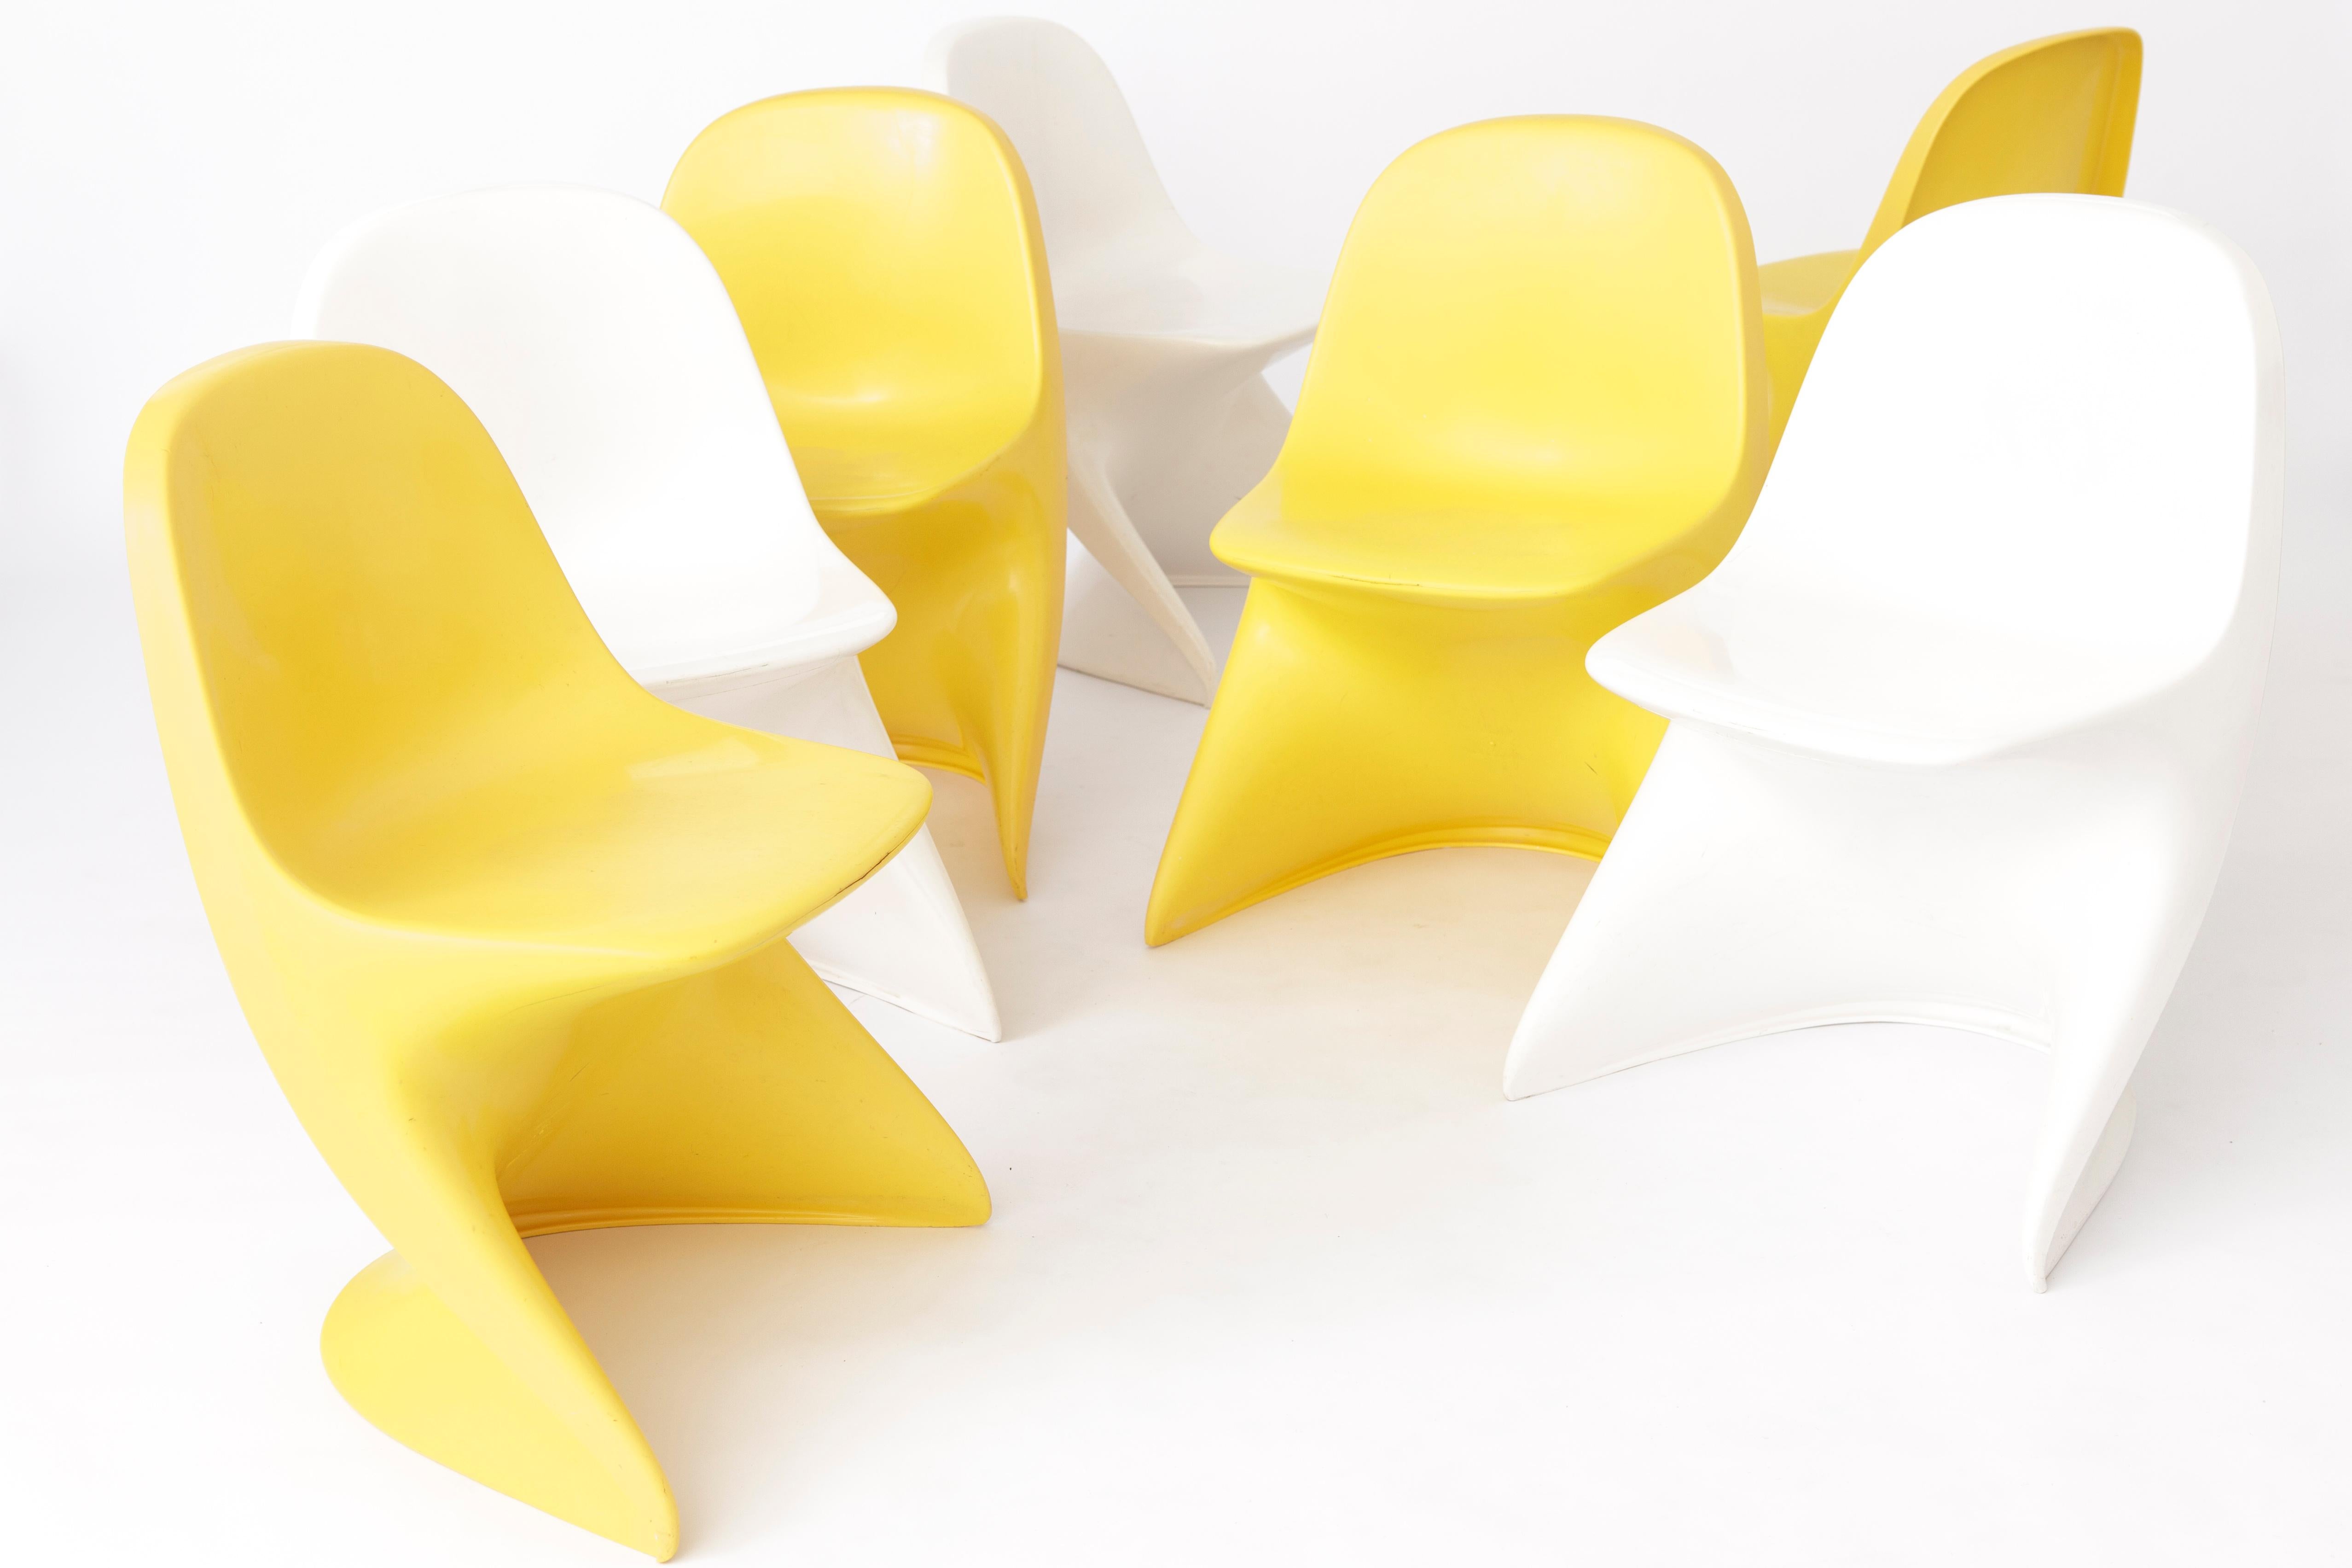 7 plastic chairs for kids, model Cassalino from the German producer Casala. 
Production period: 1970s. Design by Alexander Begge. 
Displayed price is for 7 chairs. The large chair in the first photo with metal 
elements is not part of the set. It's